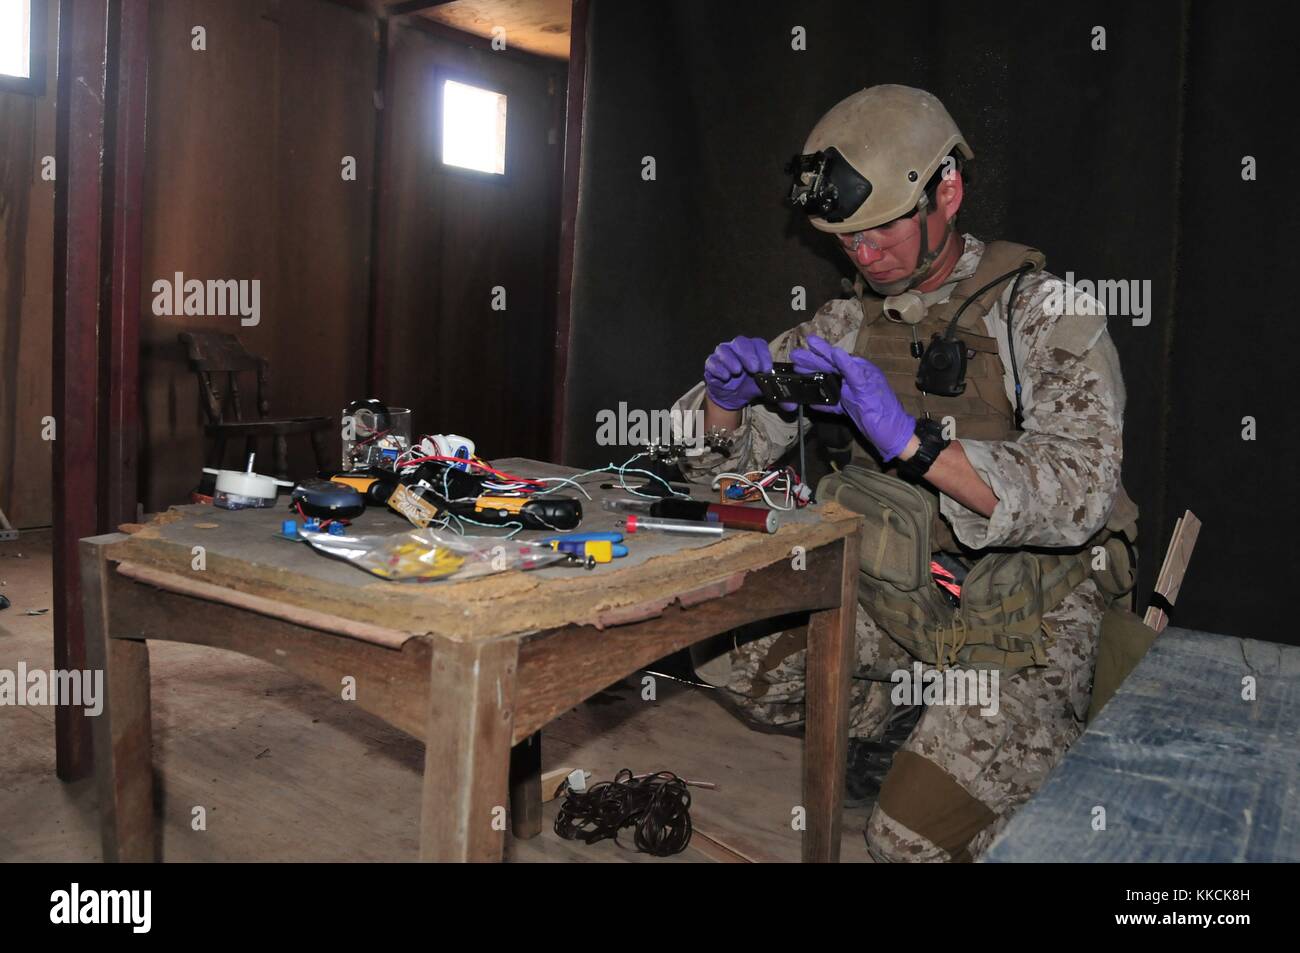 An explosive ordnance disposal EOD technician assigned to Platoon 371, Mobile Unit Three, photographs evidence found during Military Operations in Urban Terrain MOUT training, San Diego. Image courtesy Mass Communication Specialist Seaman Geneva G. Brier/US Navy, 2012. Stock Photo